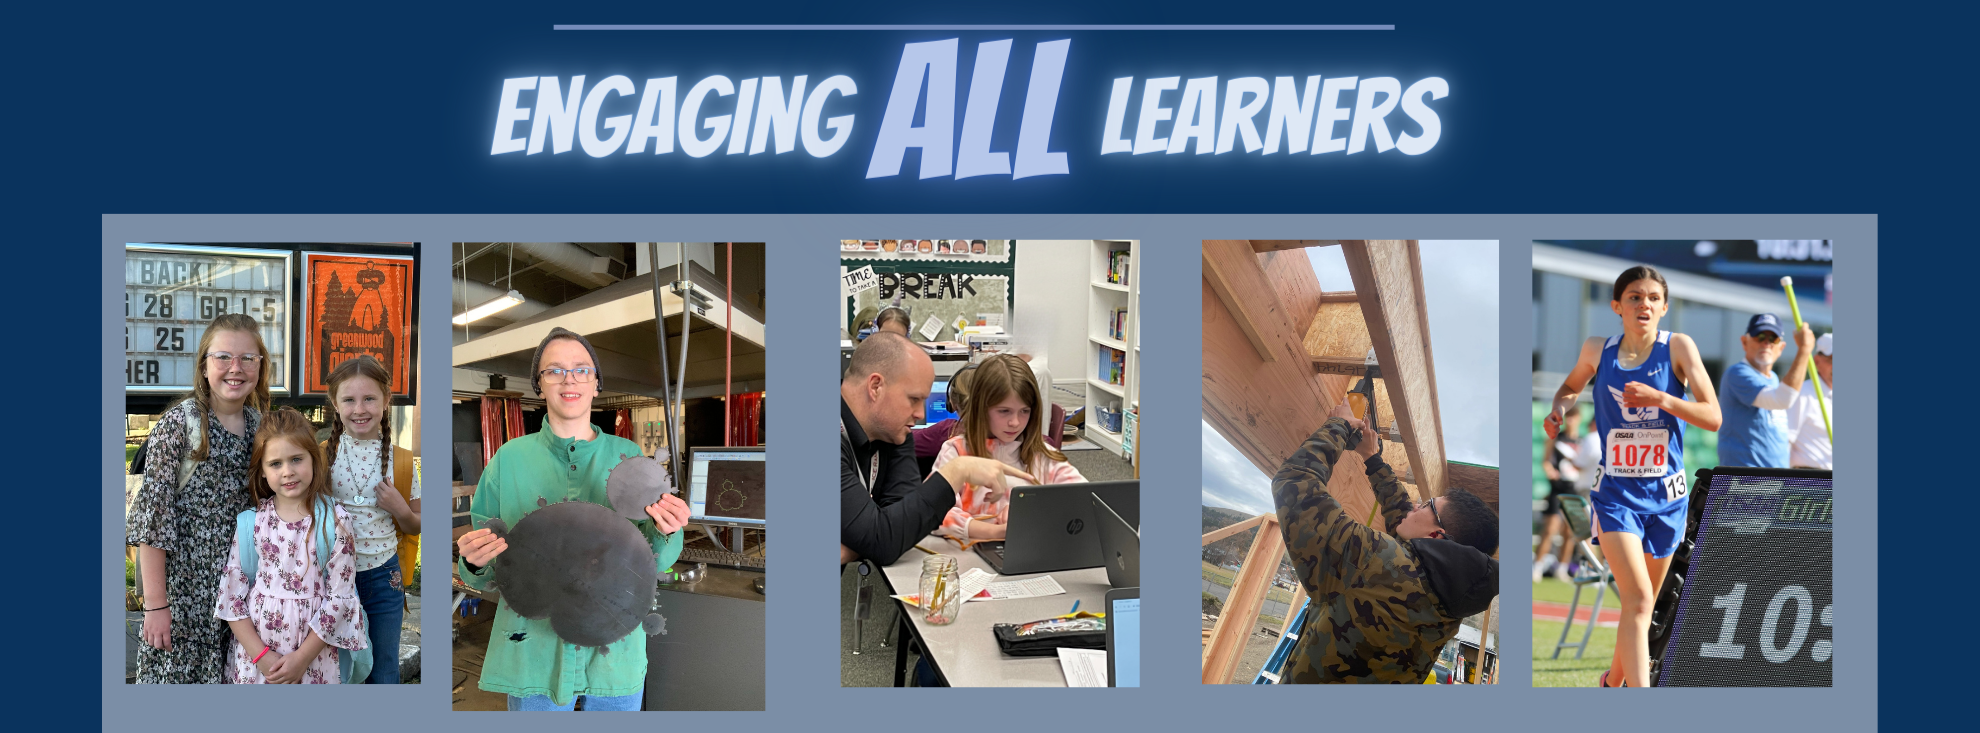 Engaging All Learners Enroll Now! 541-663-3202